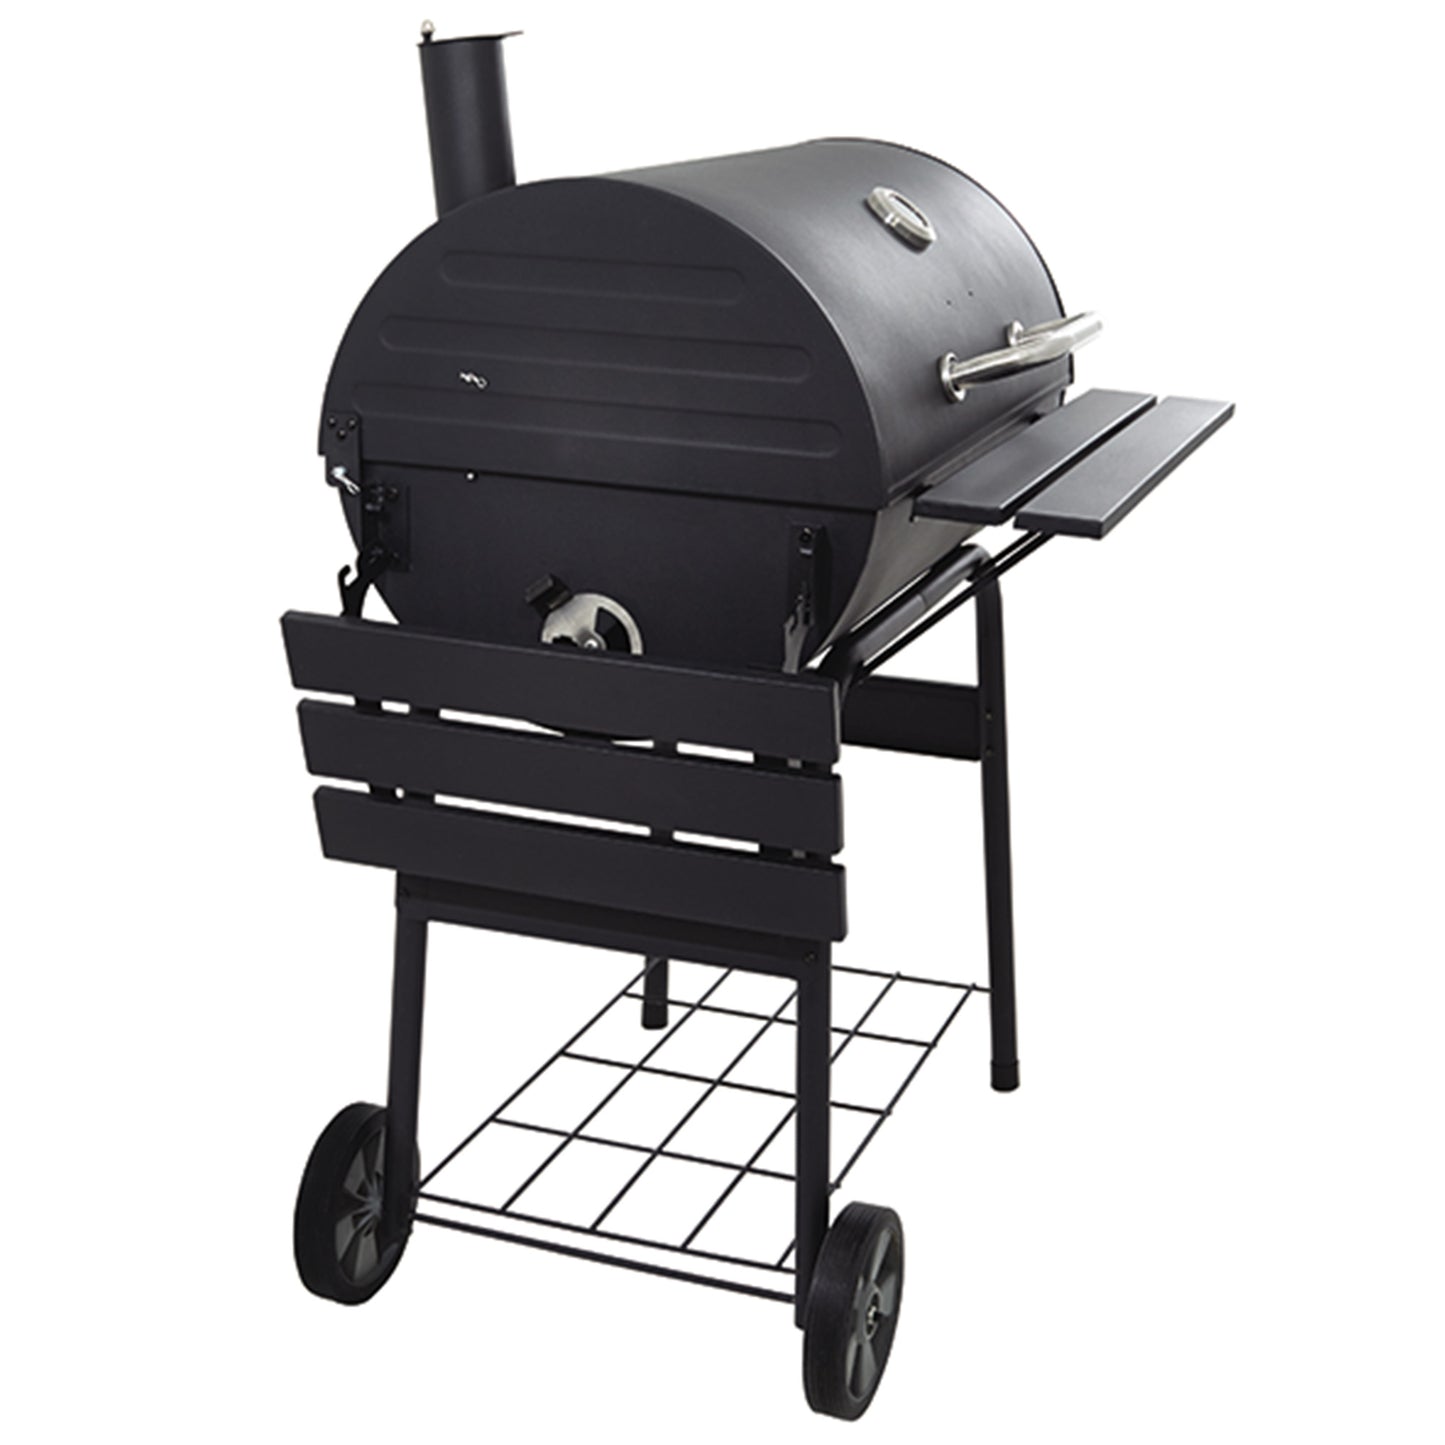 Stainless Steel Charcoal 30" Barrel BBQ Grill Barbecue Smoker for Outdoor Picnic,Black